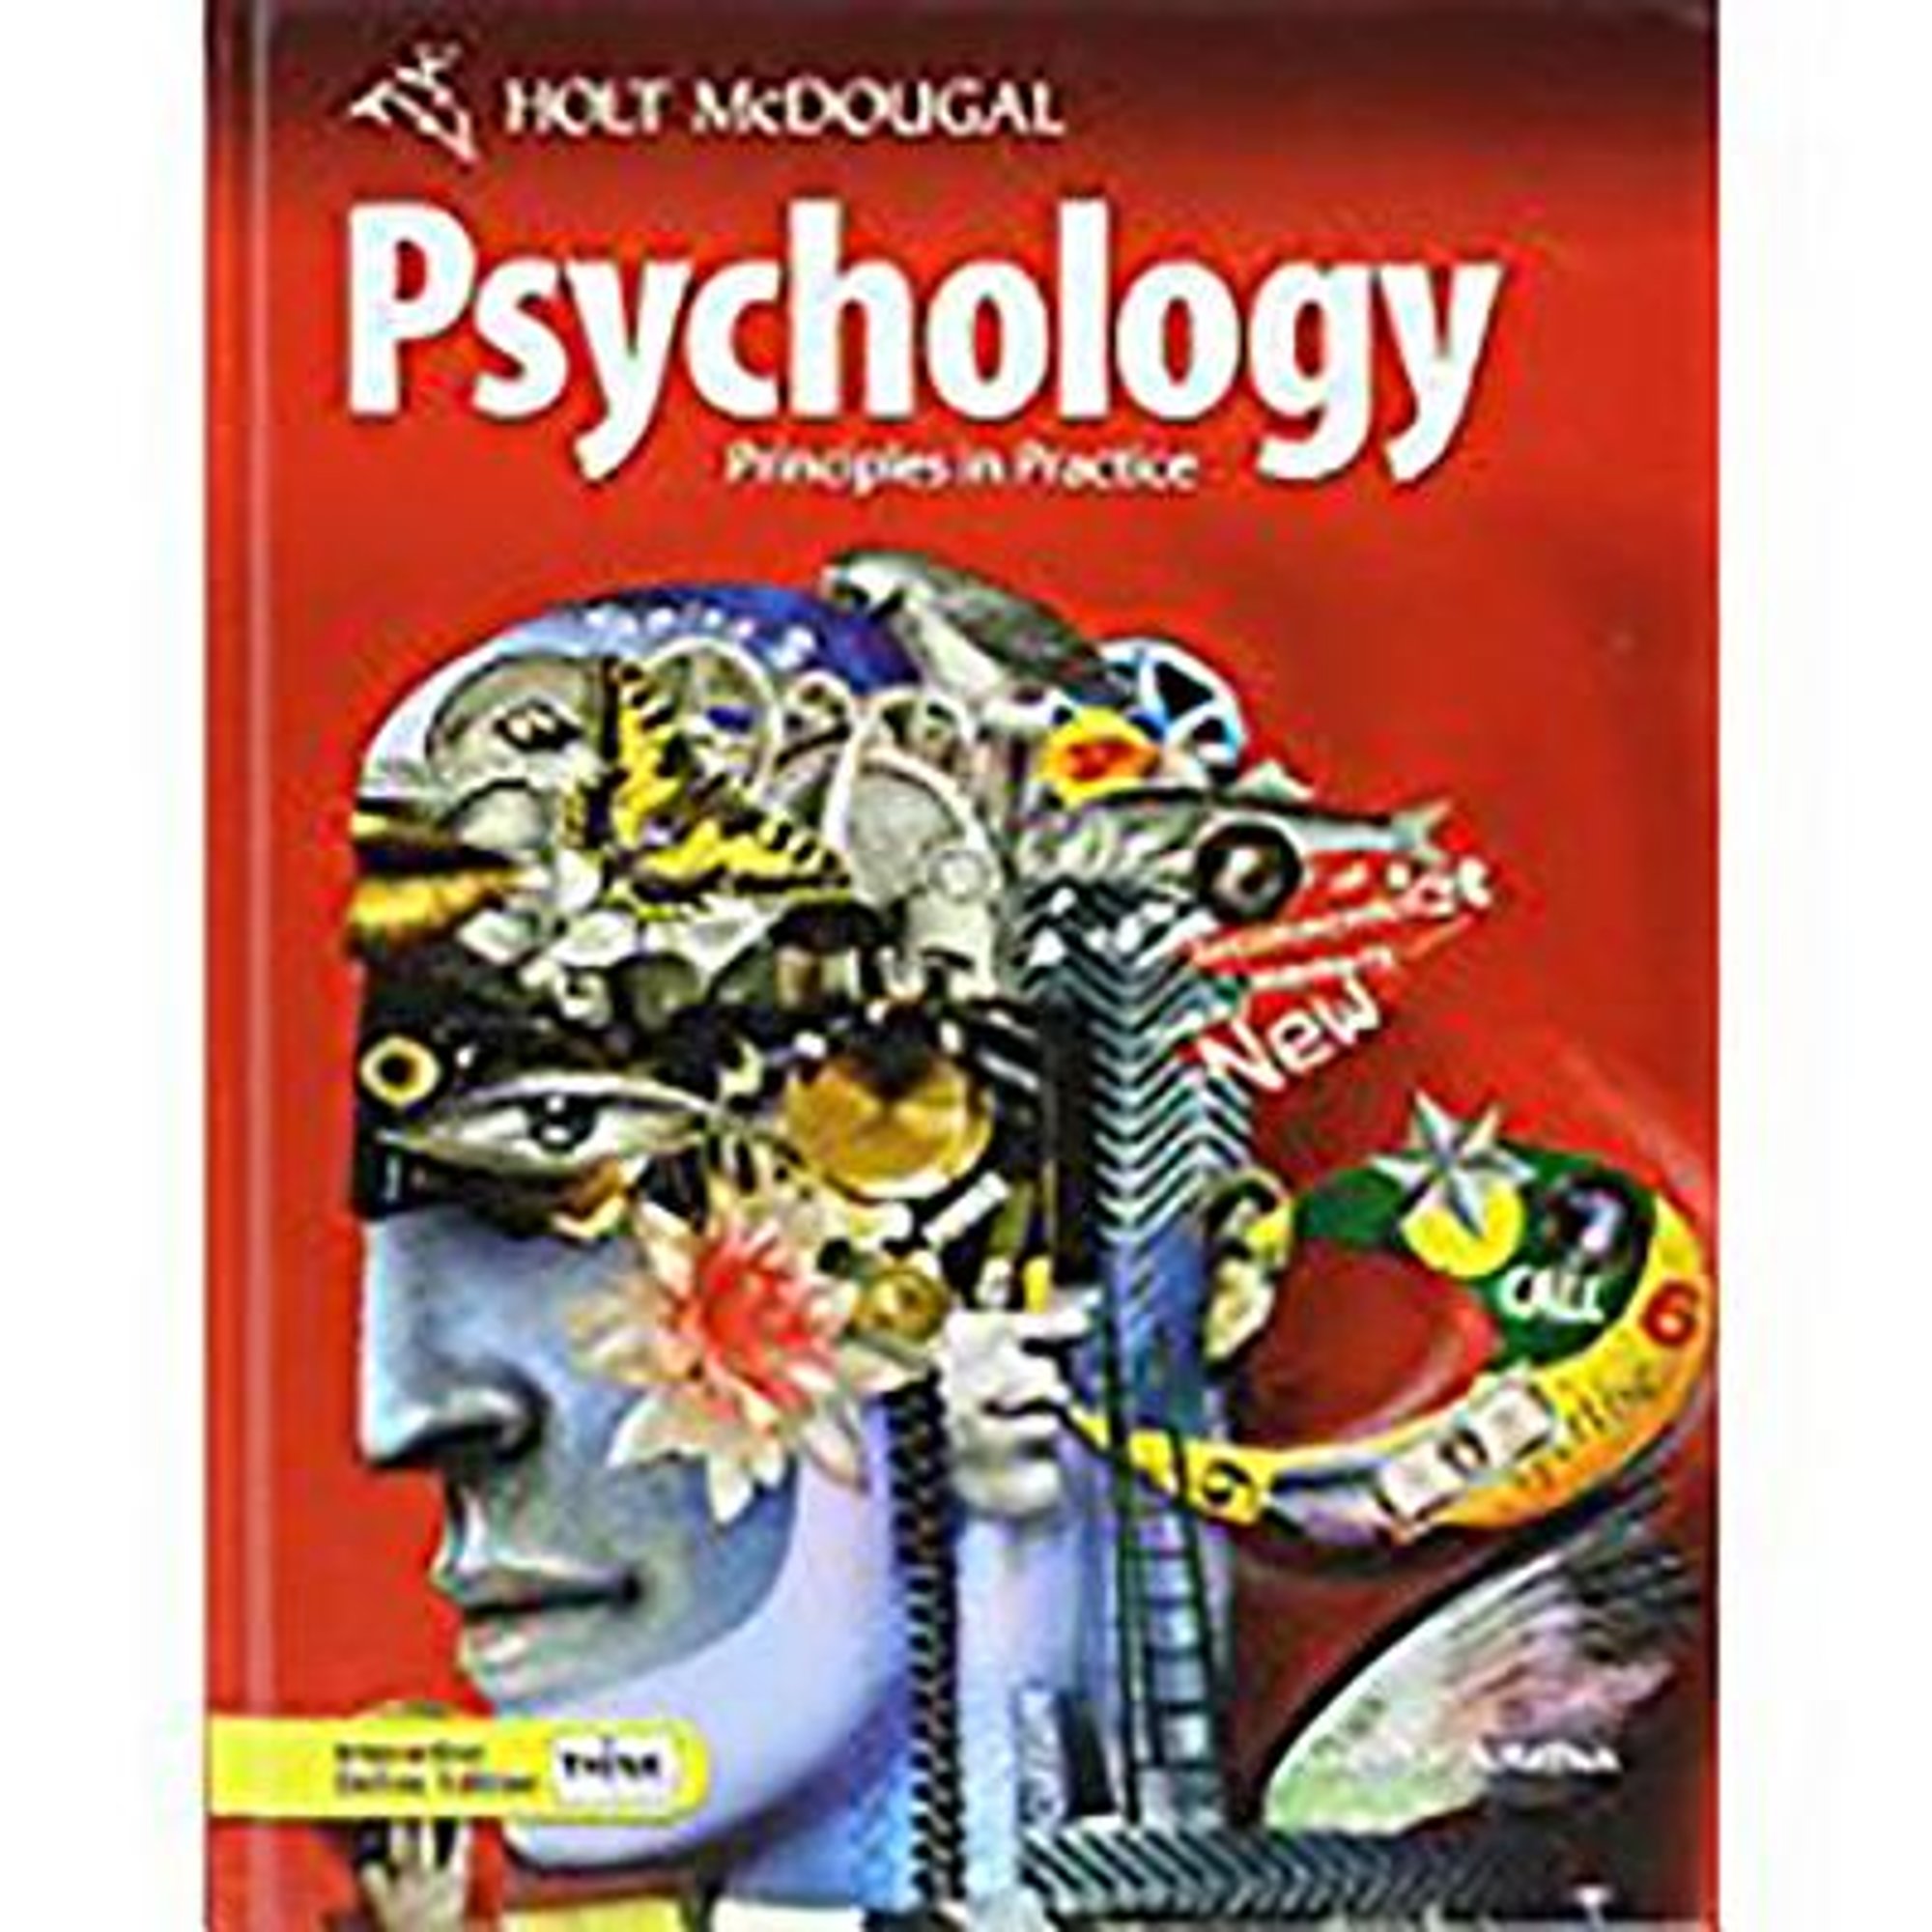 McDougal　Practice:　Pre-Owned　by　in　Psychology　by)　Principles　(Prepared　9780554004013)　Edition　Student　2010　(Hardcover　Holt　for　publication